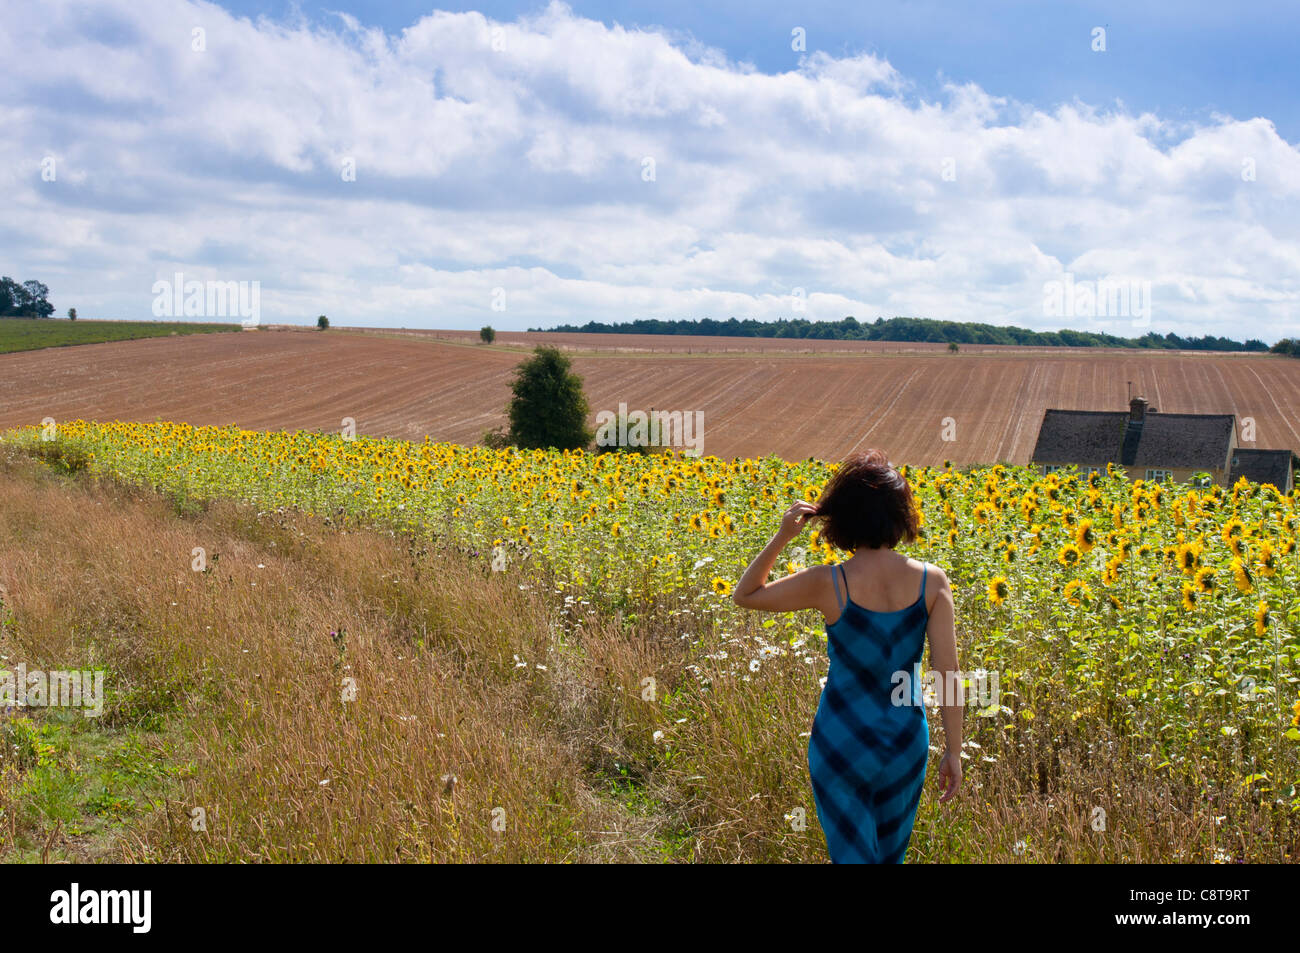 A girl walking in a field of sunflowers at Snowhill in the Worcestershire Cotwolds. England. Stock Photo